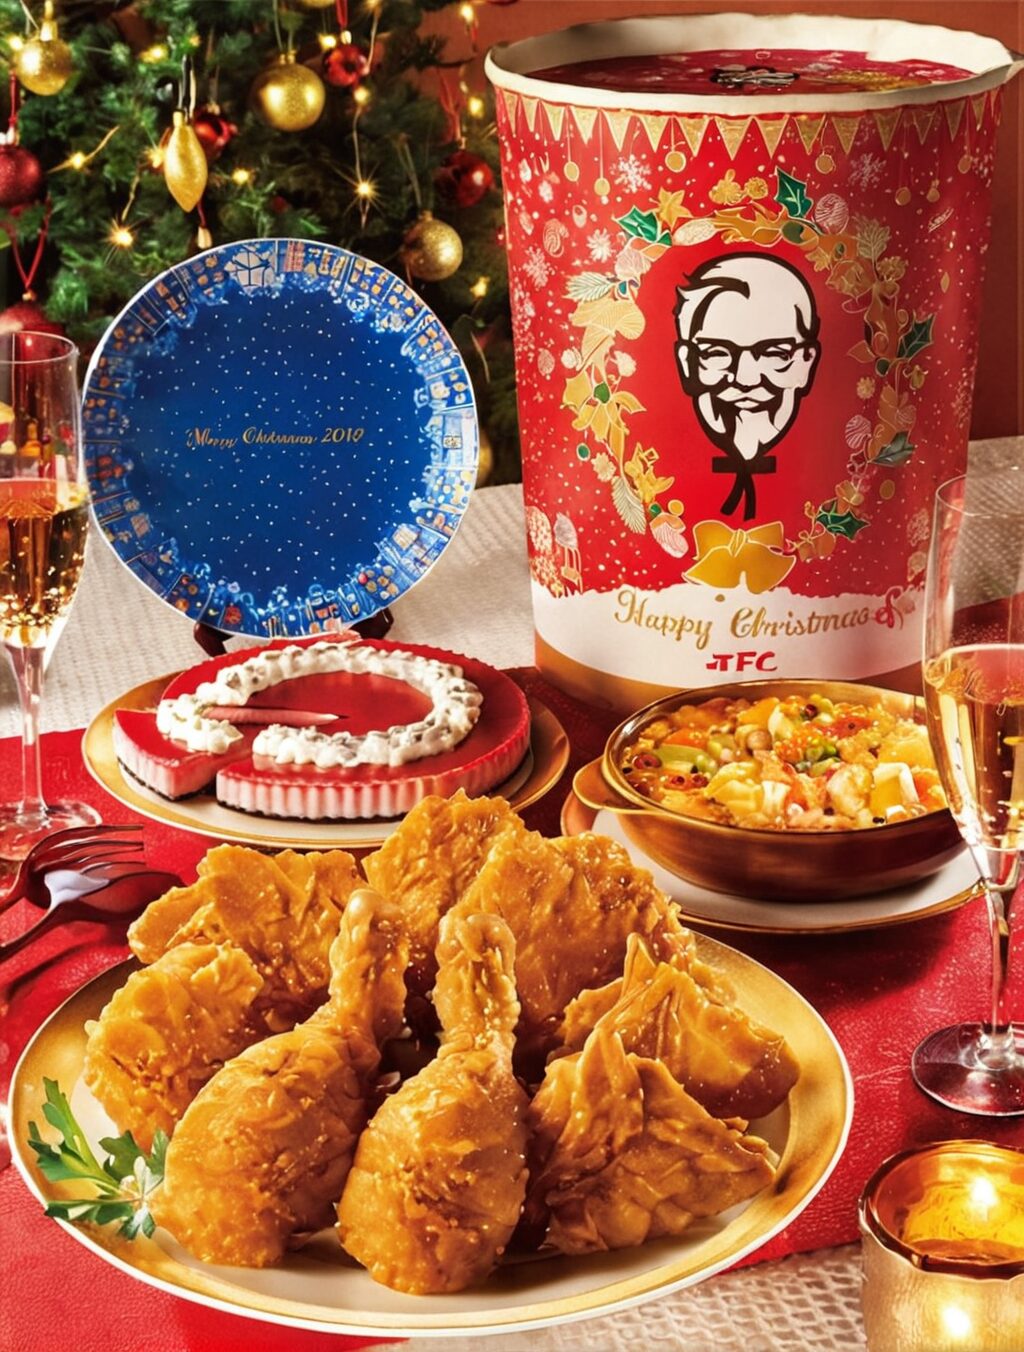 what does japan eat and drink on christmas